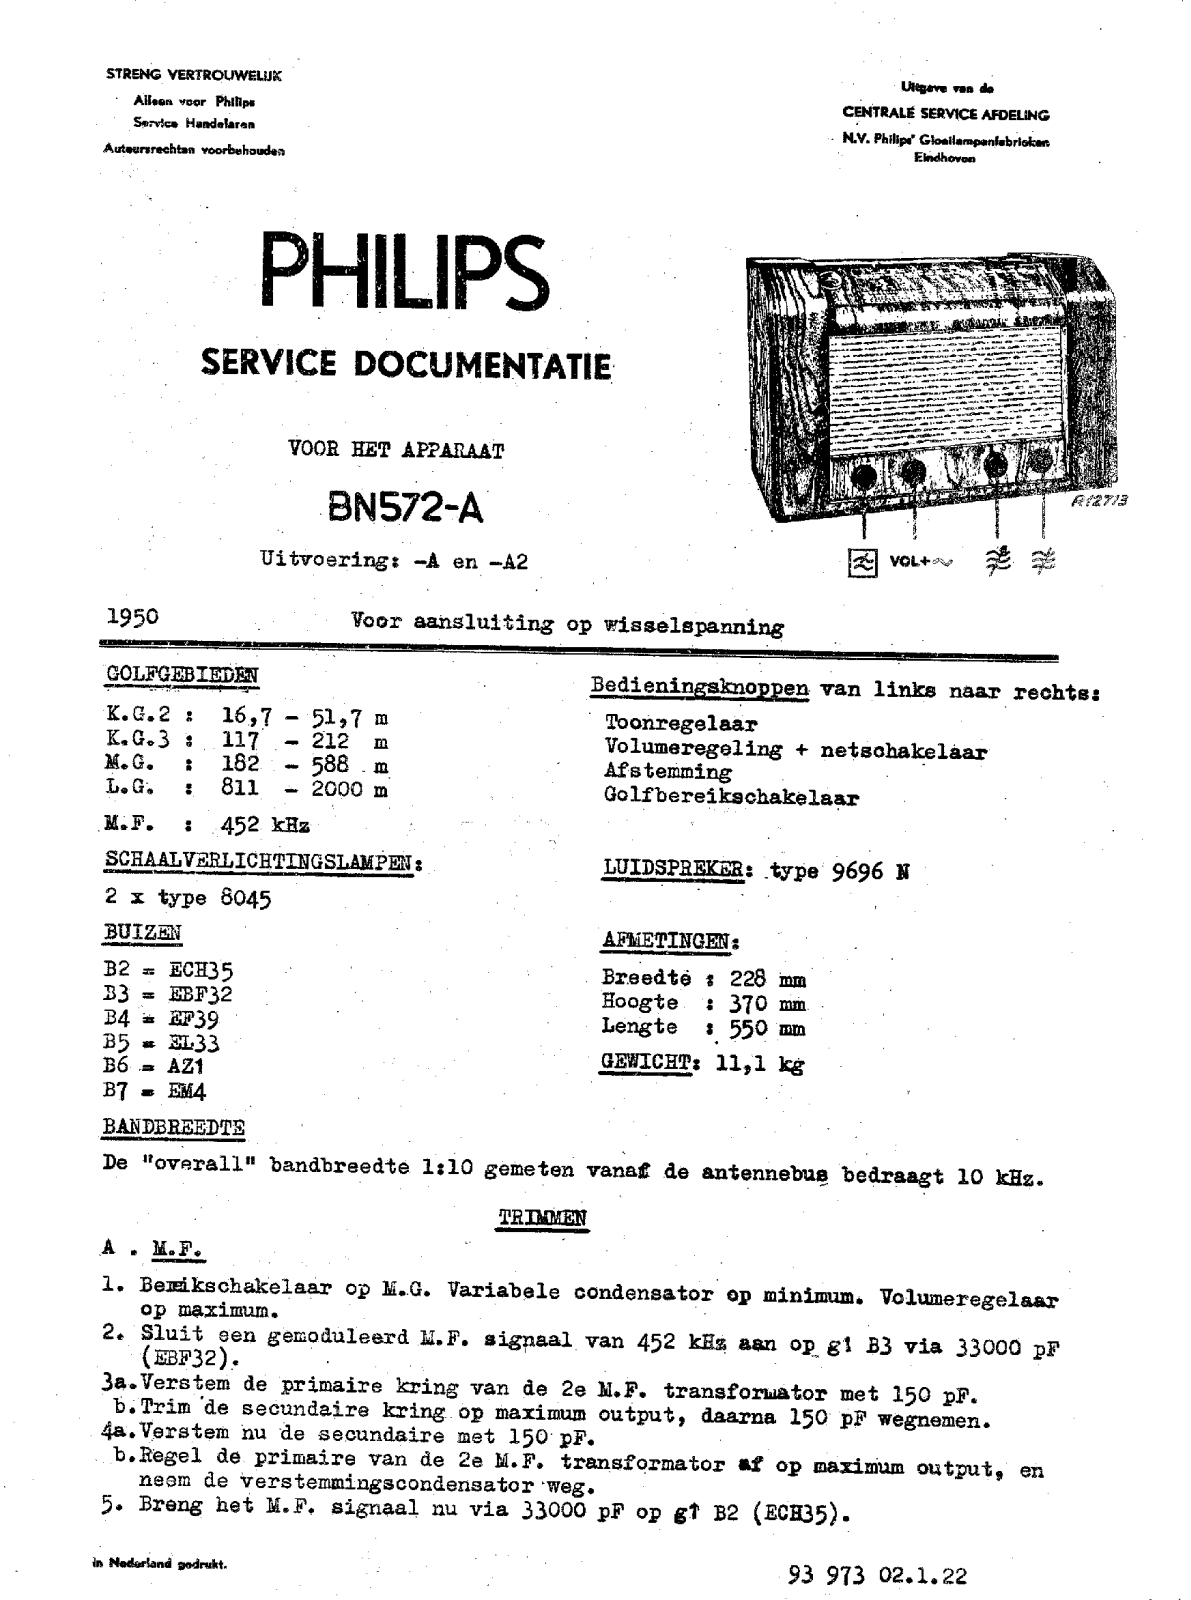 Philips BN-572-A Service Manual